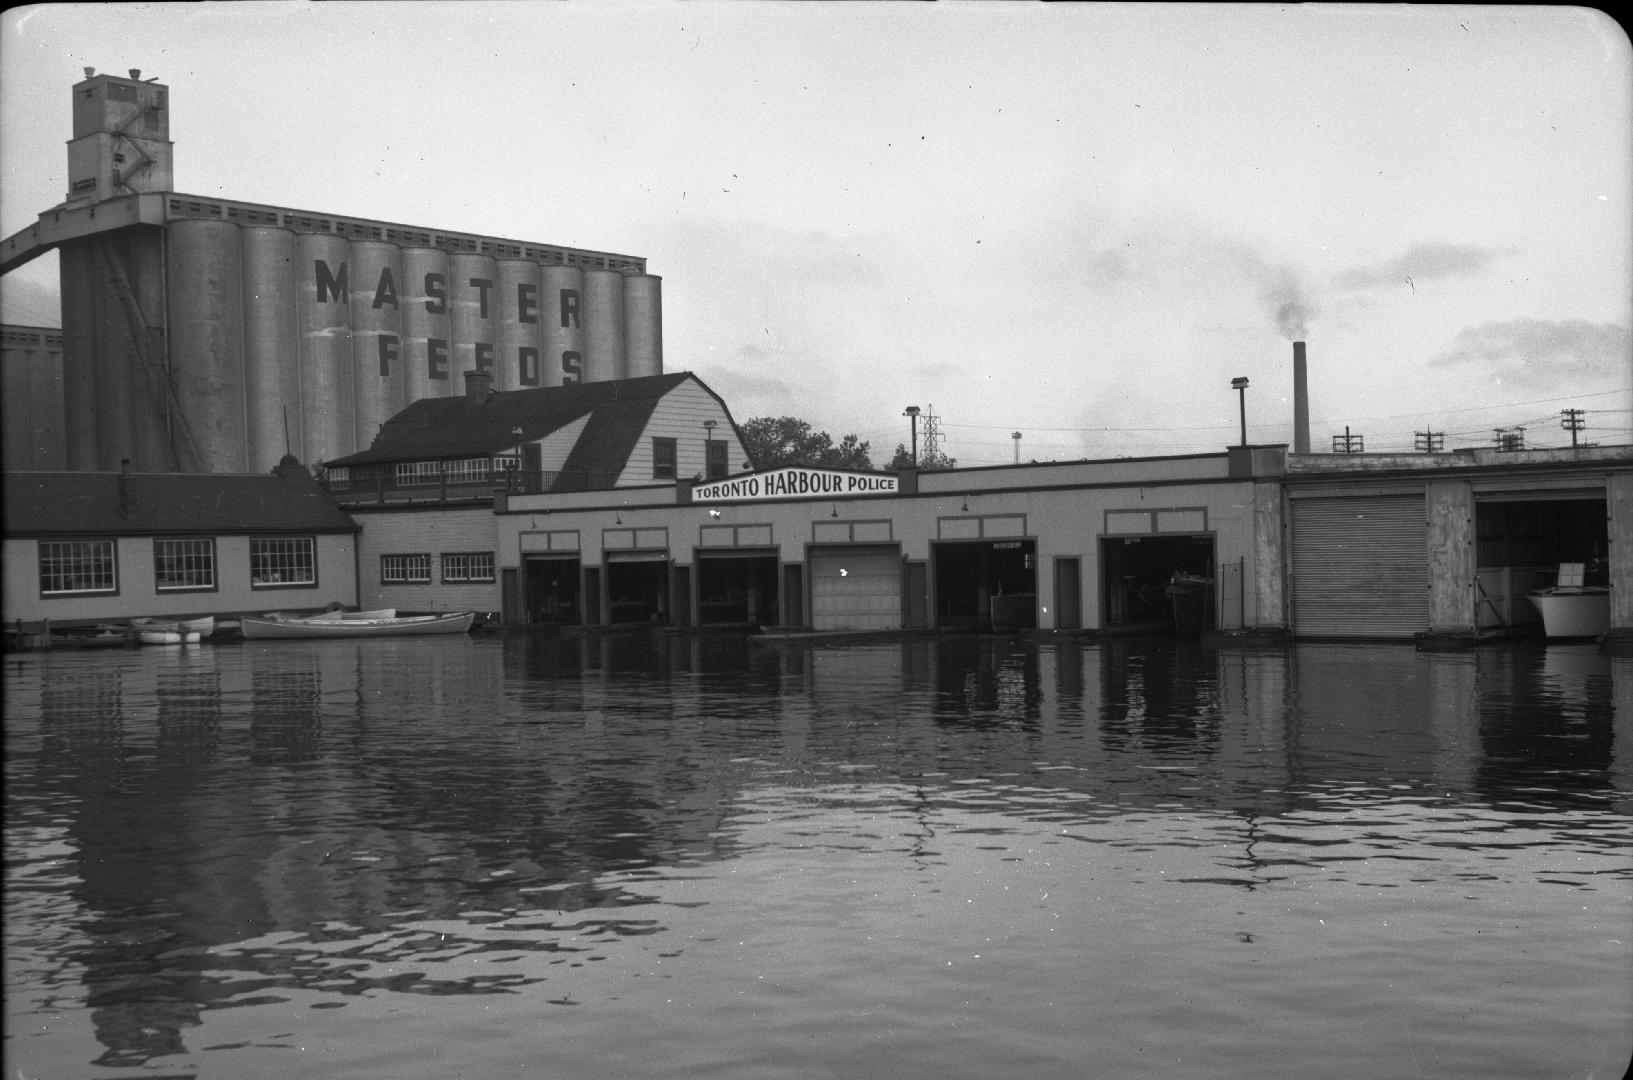 Image shows a lake view with the Toronto Harbour Police Station in the background.